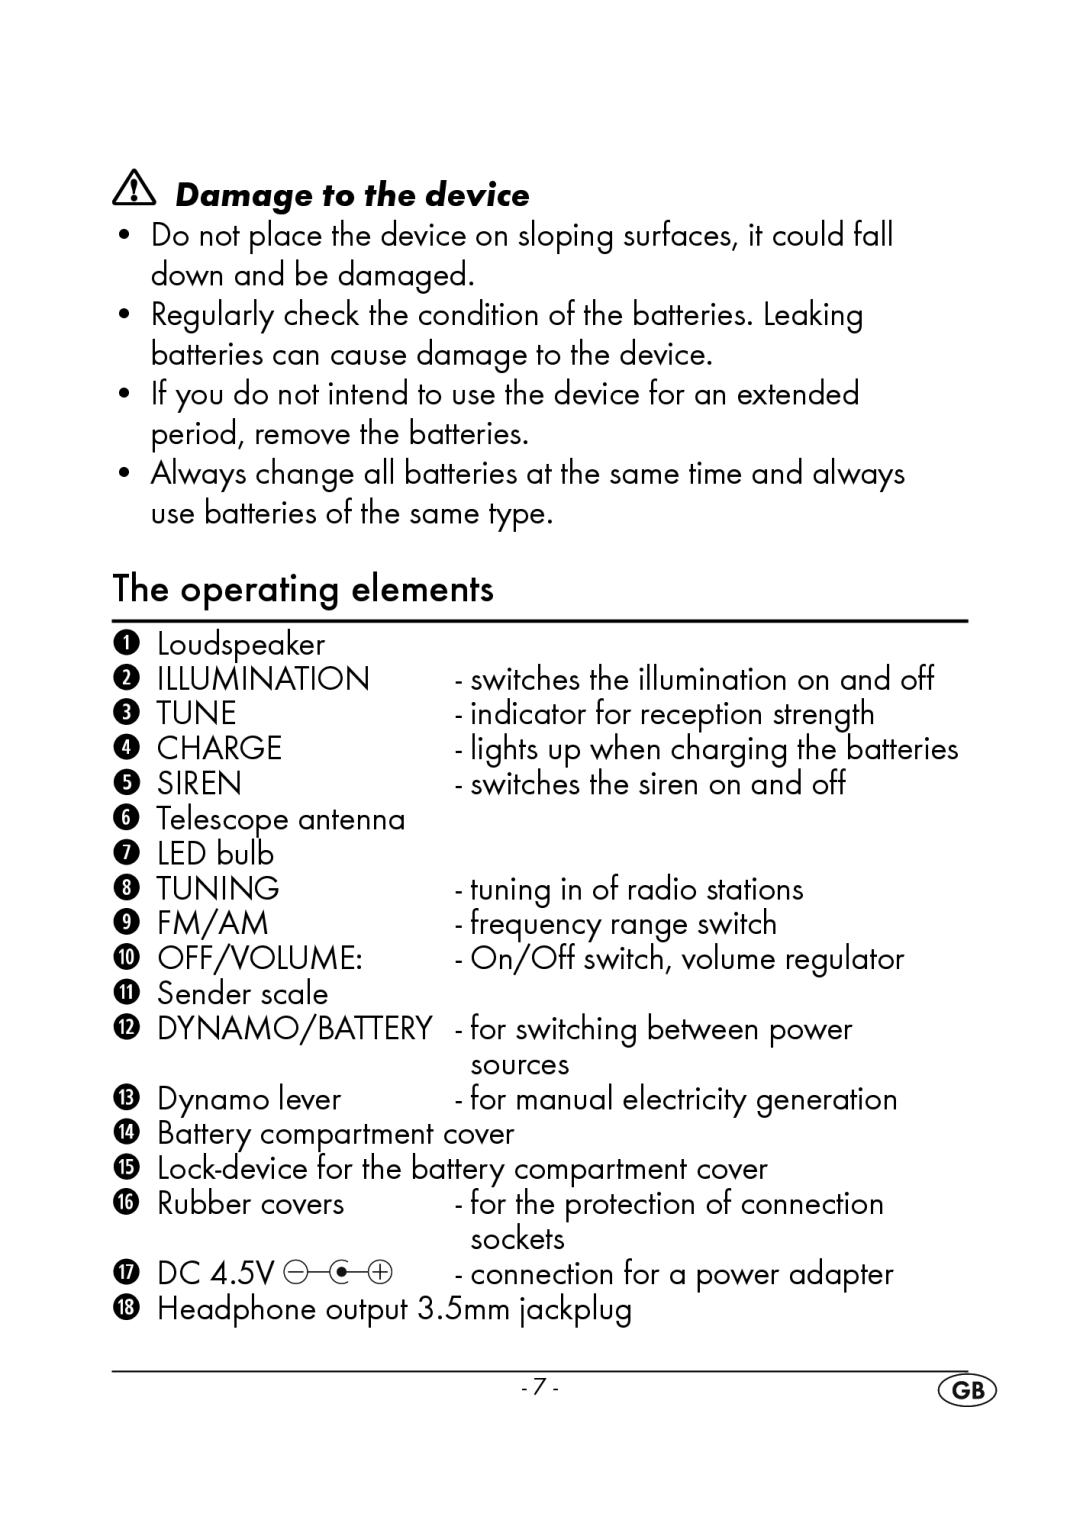 Silvercrest KH 245 manual The operating elements, Damage to the device 